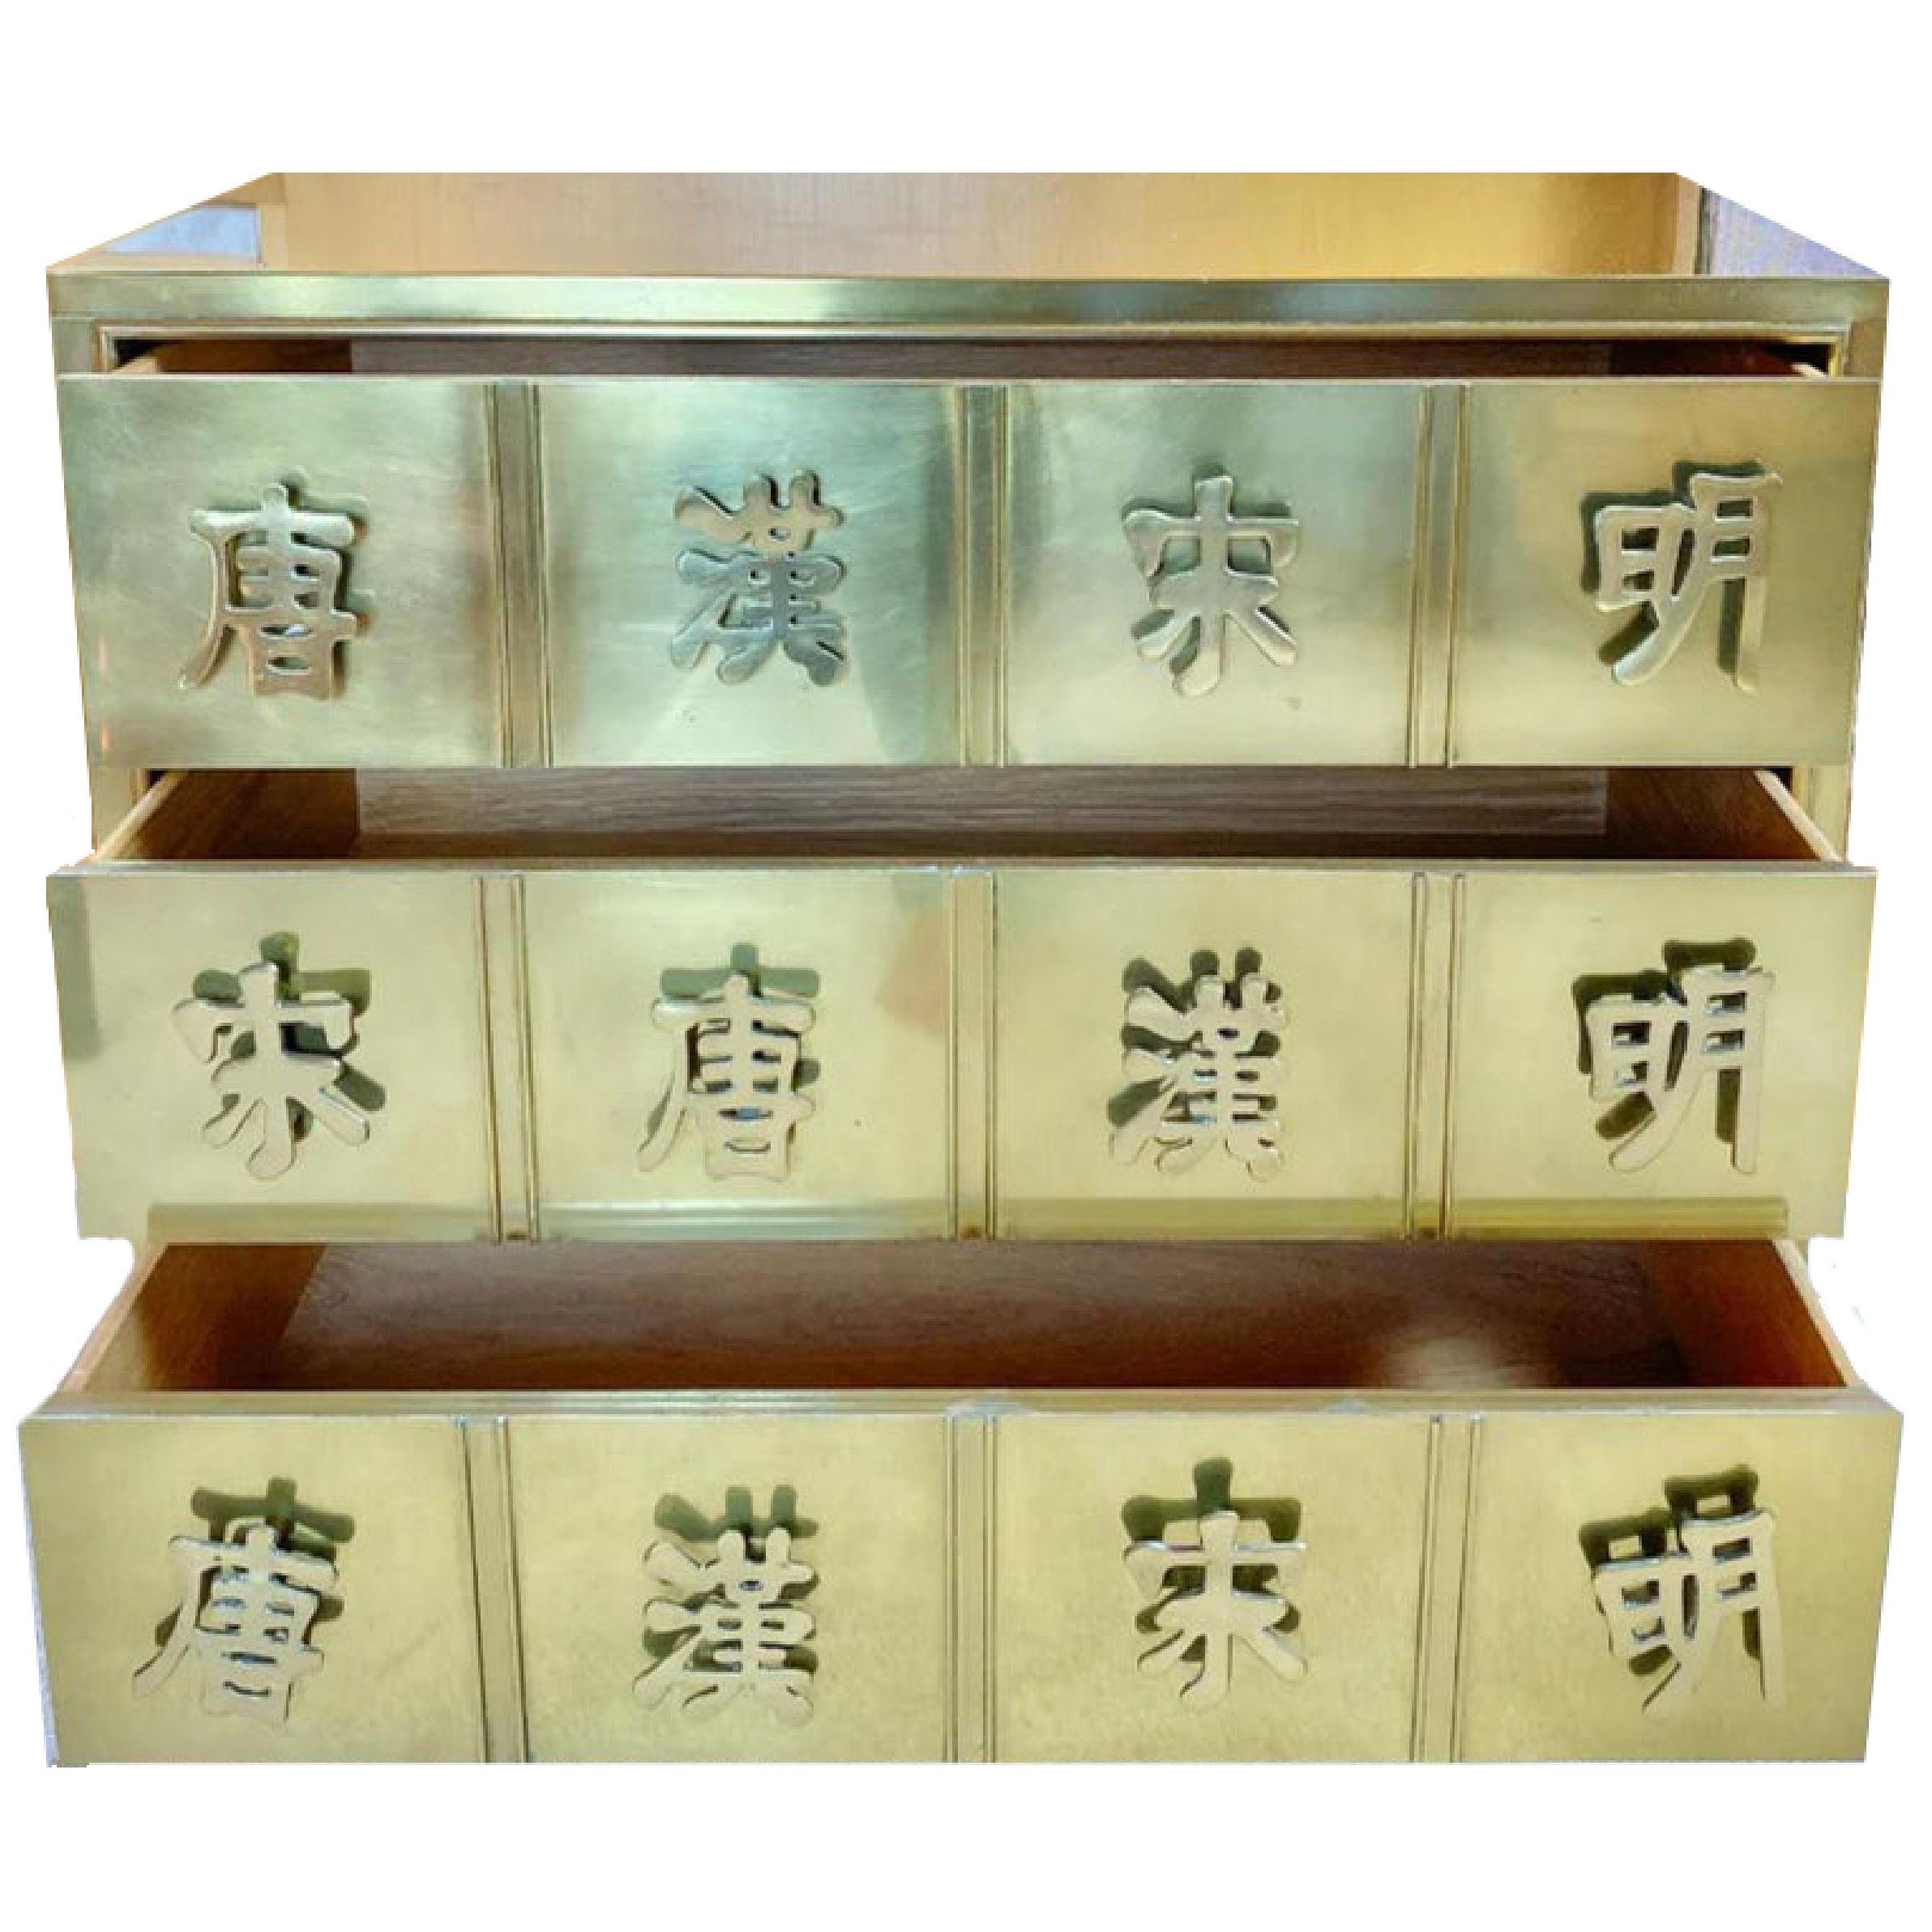 Mastercraft Dynasty Chest of Drawers, Hollywood Regency Commode Dresser, 1970s. Produced by Mastercraft in the 1970's, 3 Drawer Chest of Drawers in Brass, Bronze and Cedar with six chinese characters (representing the four dynasties) which double as